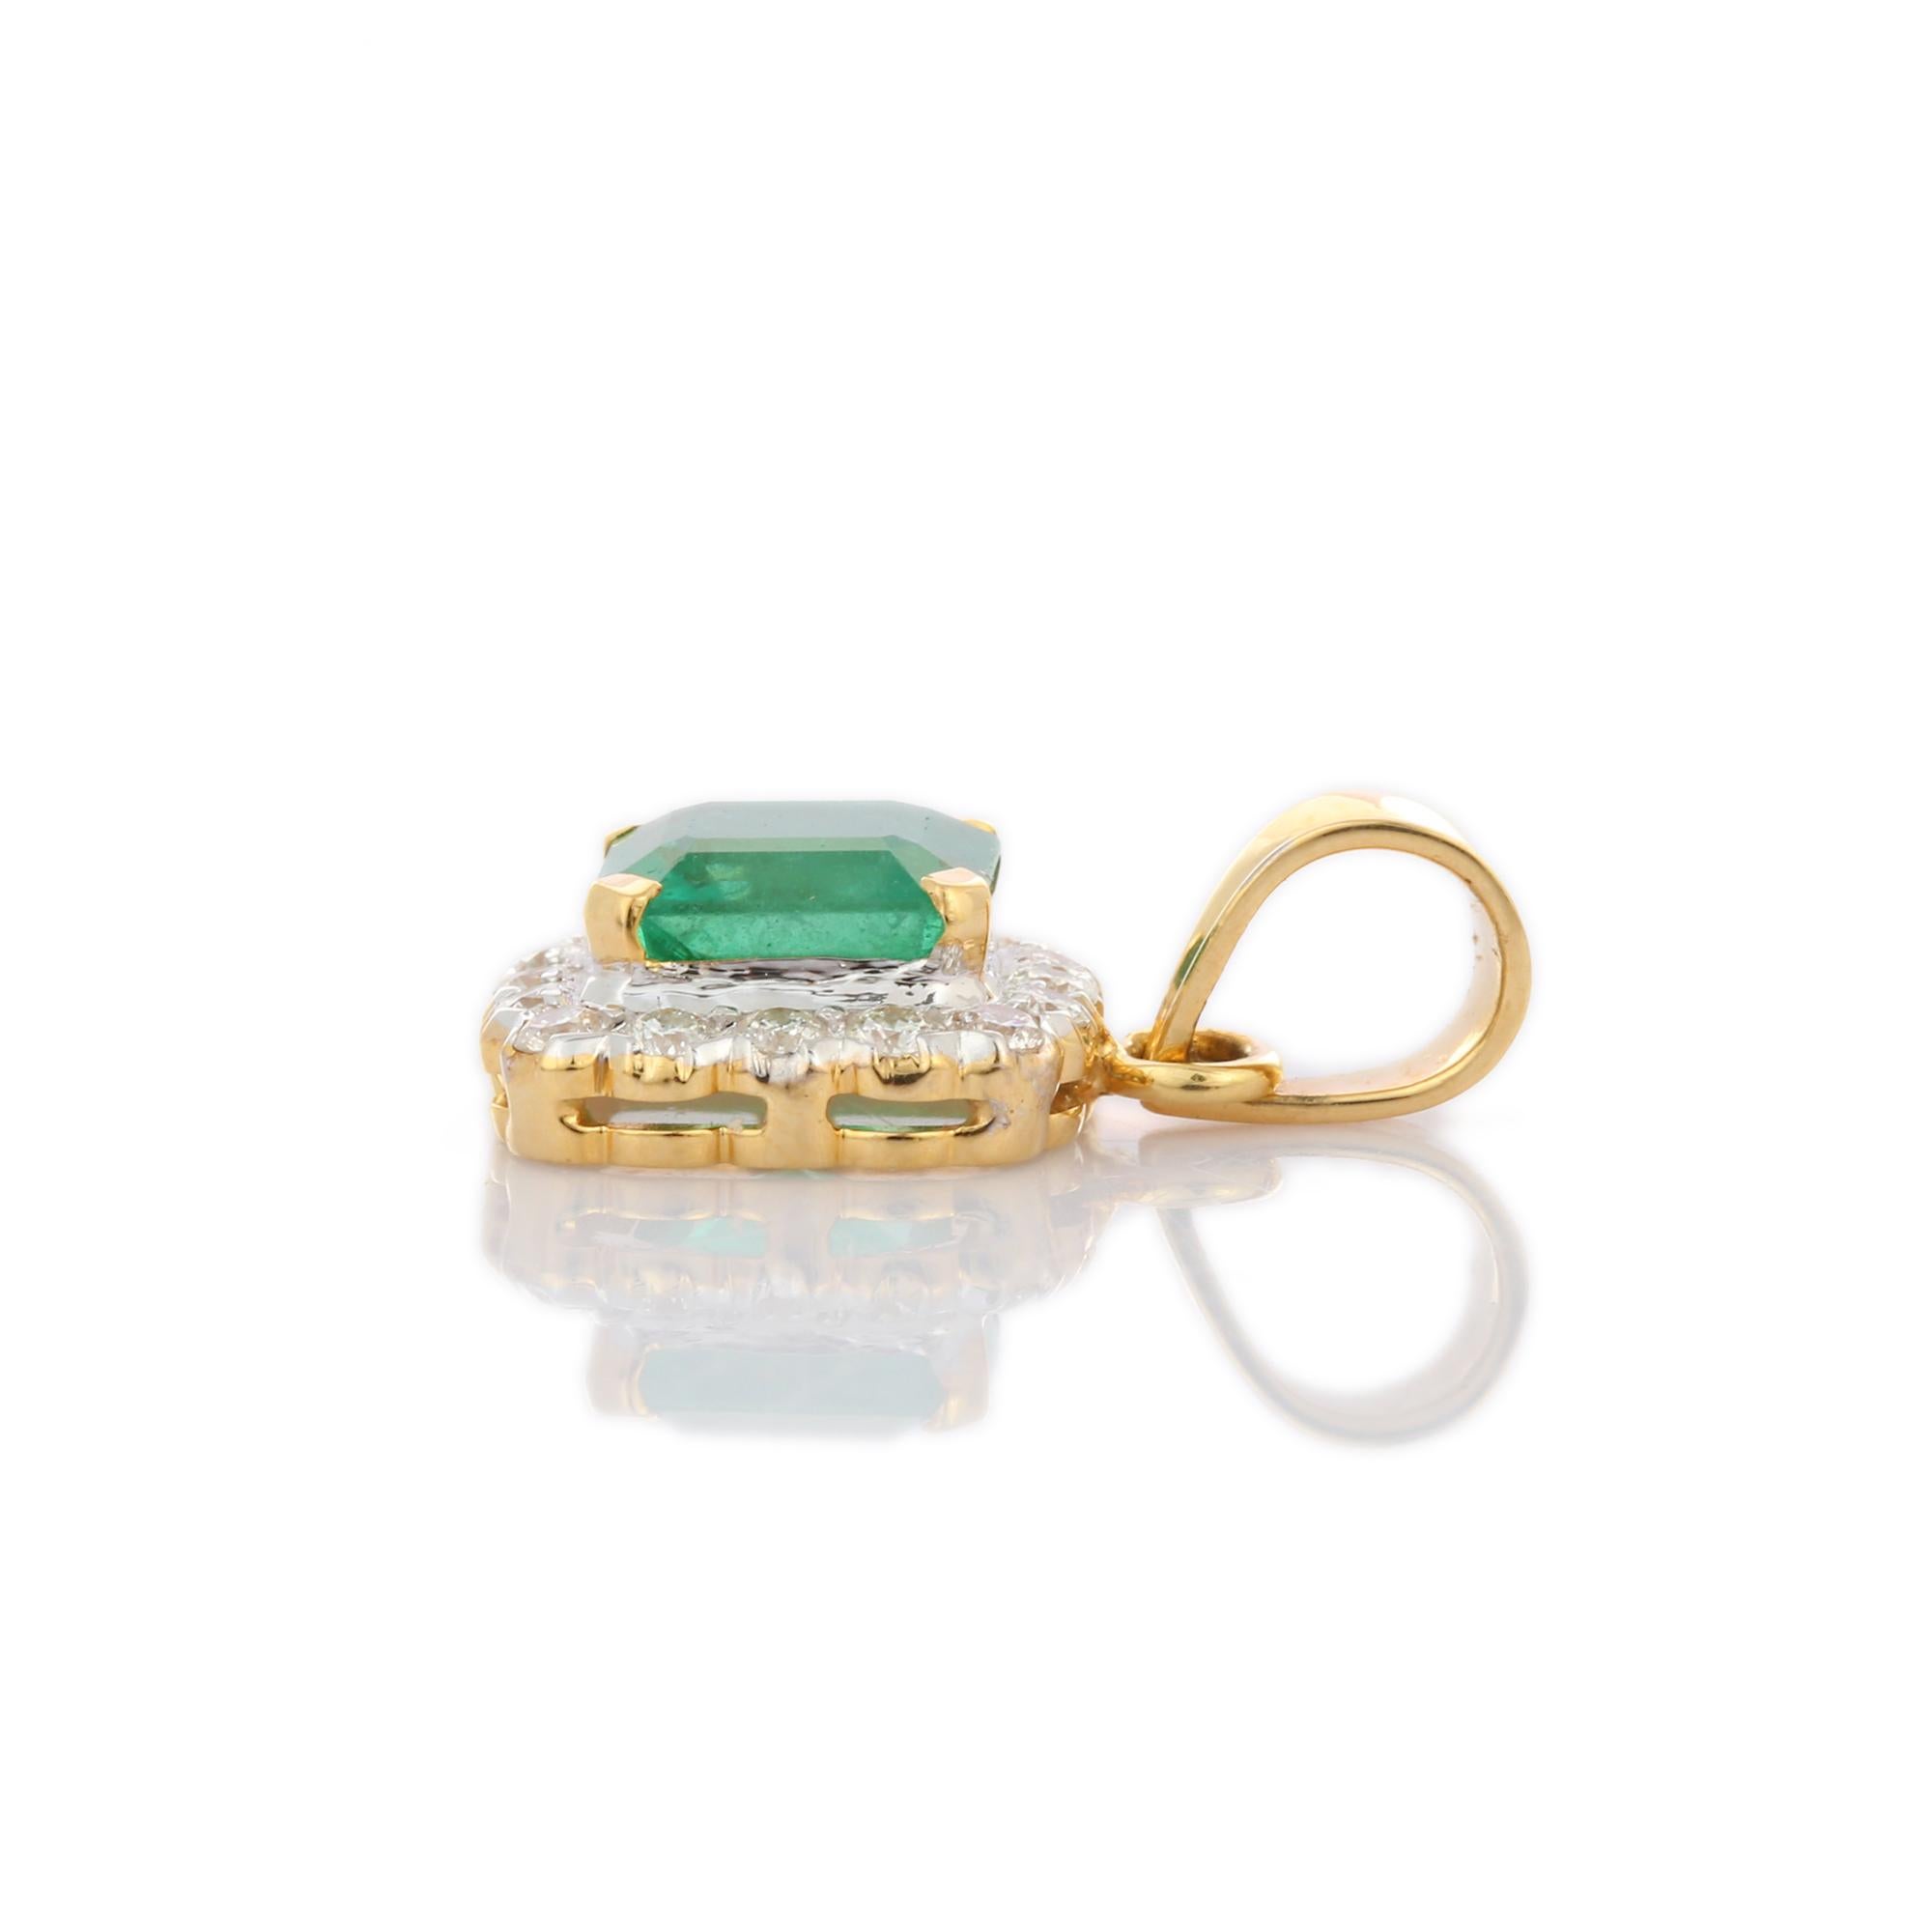 Emerald Diamond pendant in 14K Gold. It has a cushion cut emerald studded with diamonds that completes your look with a decent touch. Pendants are used to wear or gifted to represent love and promises. It's an attractive jewelry piece that goes with